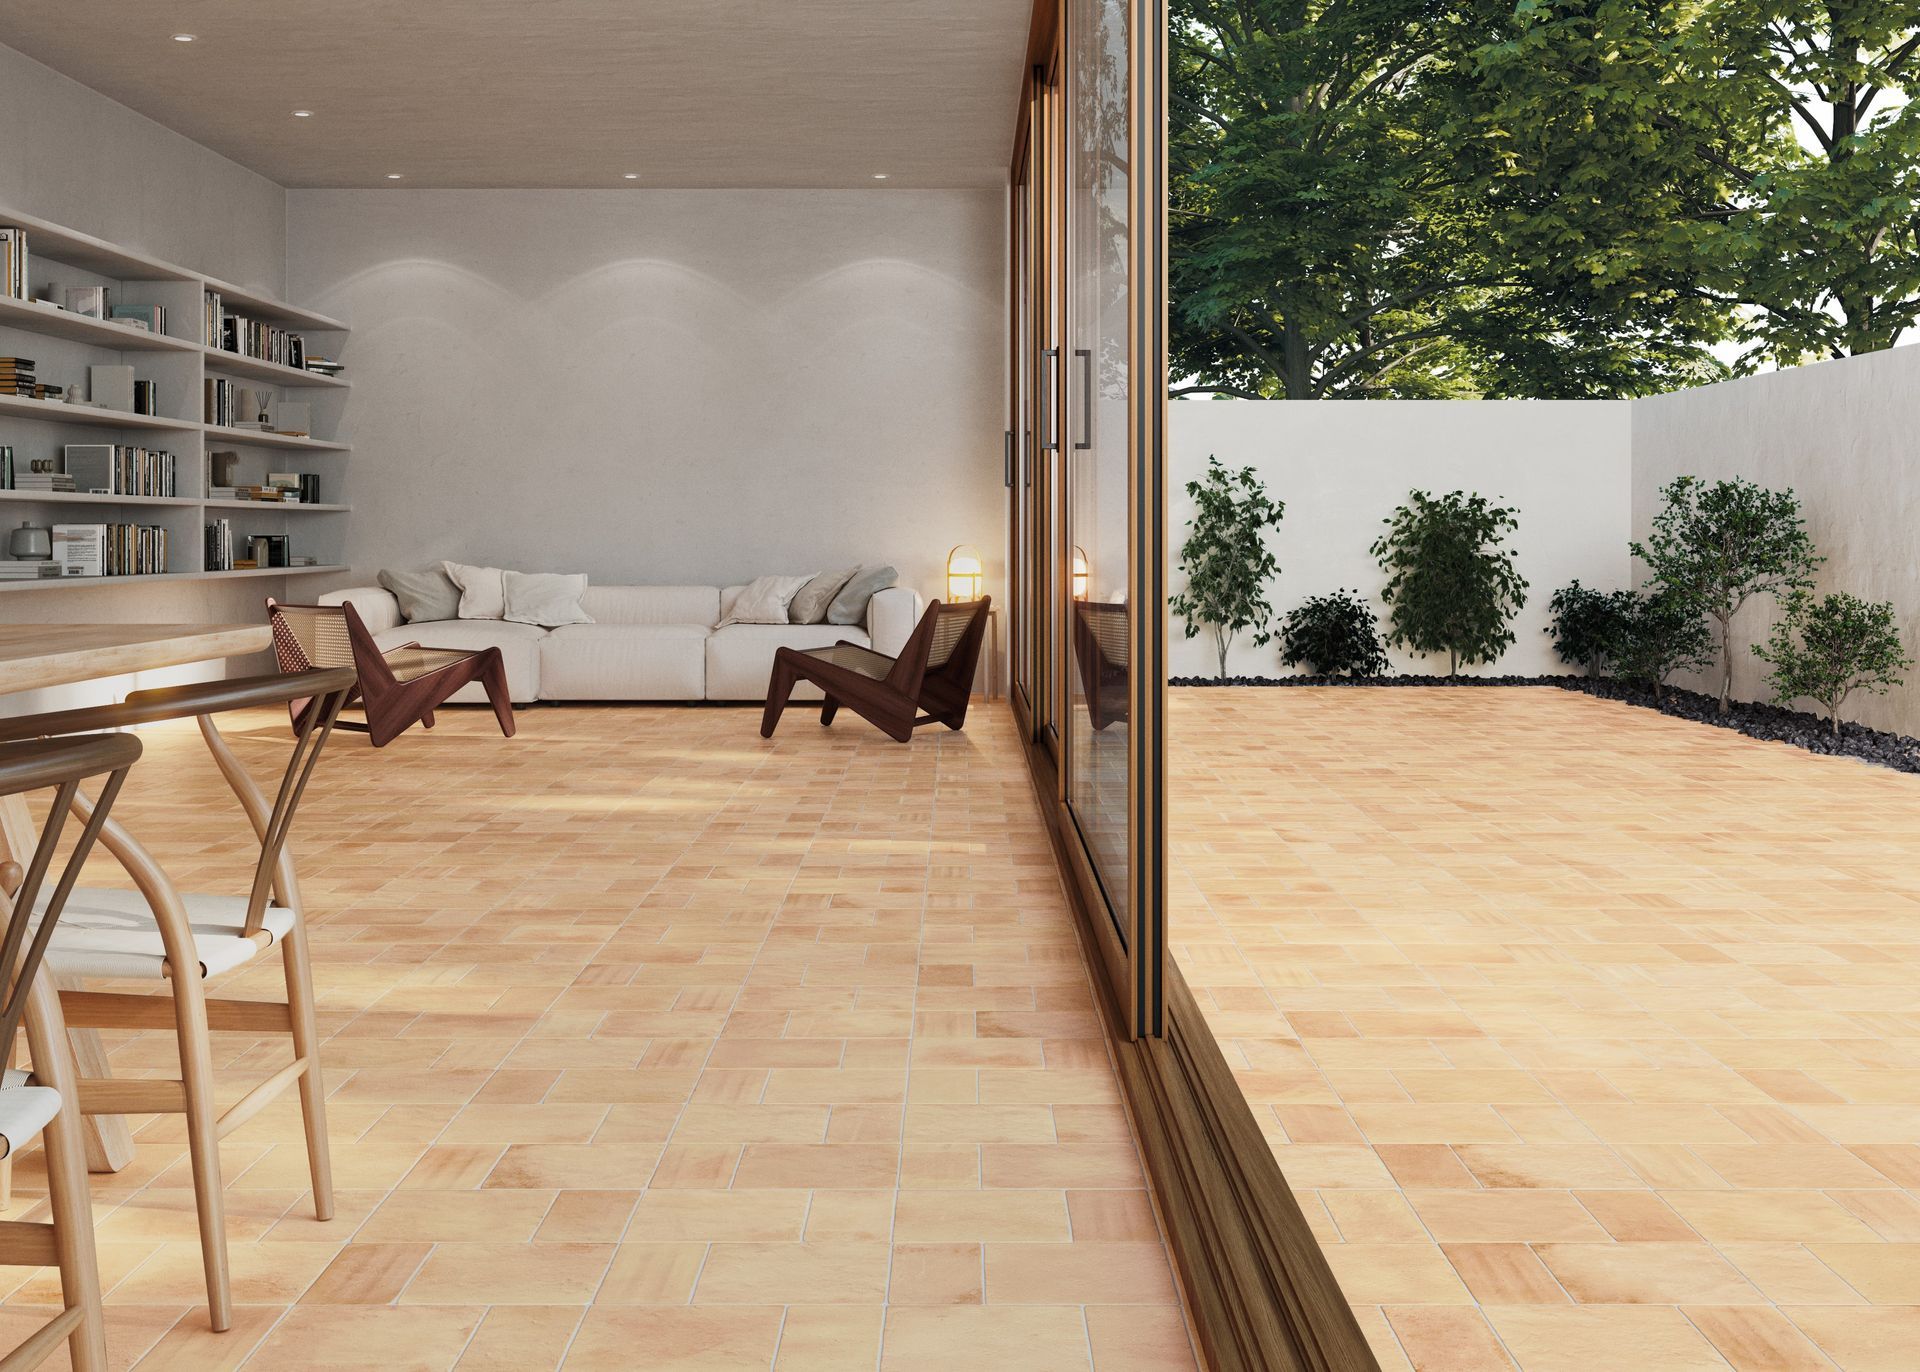 terracotta effect tiles used indoors and outdoors